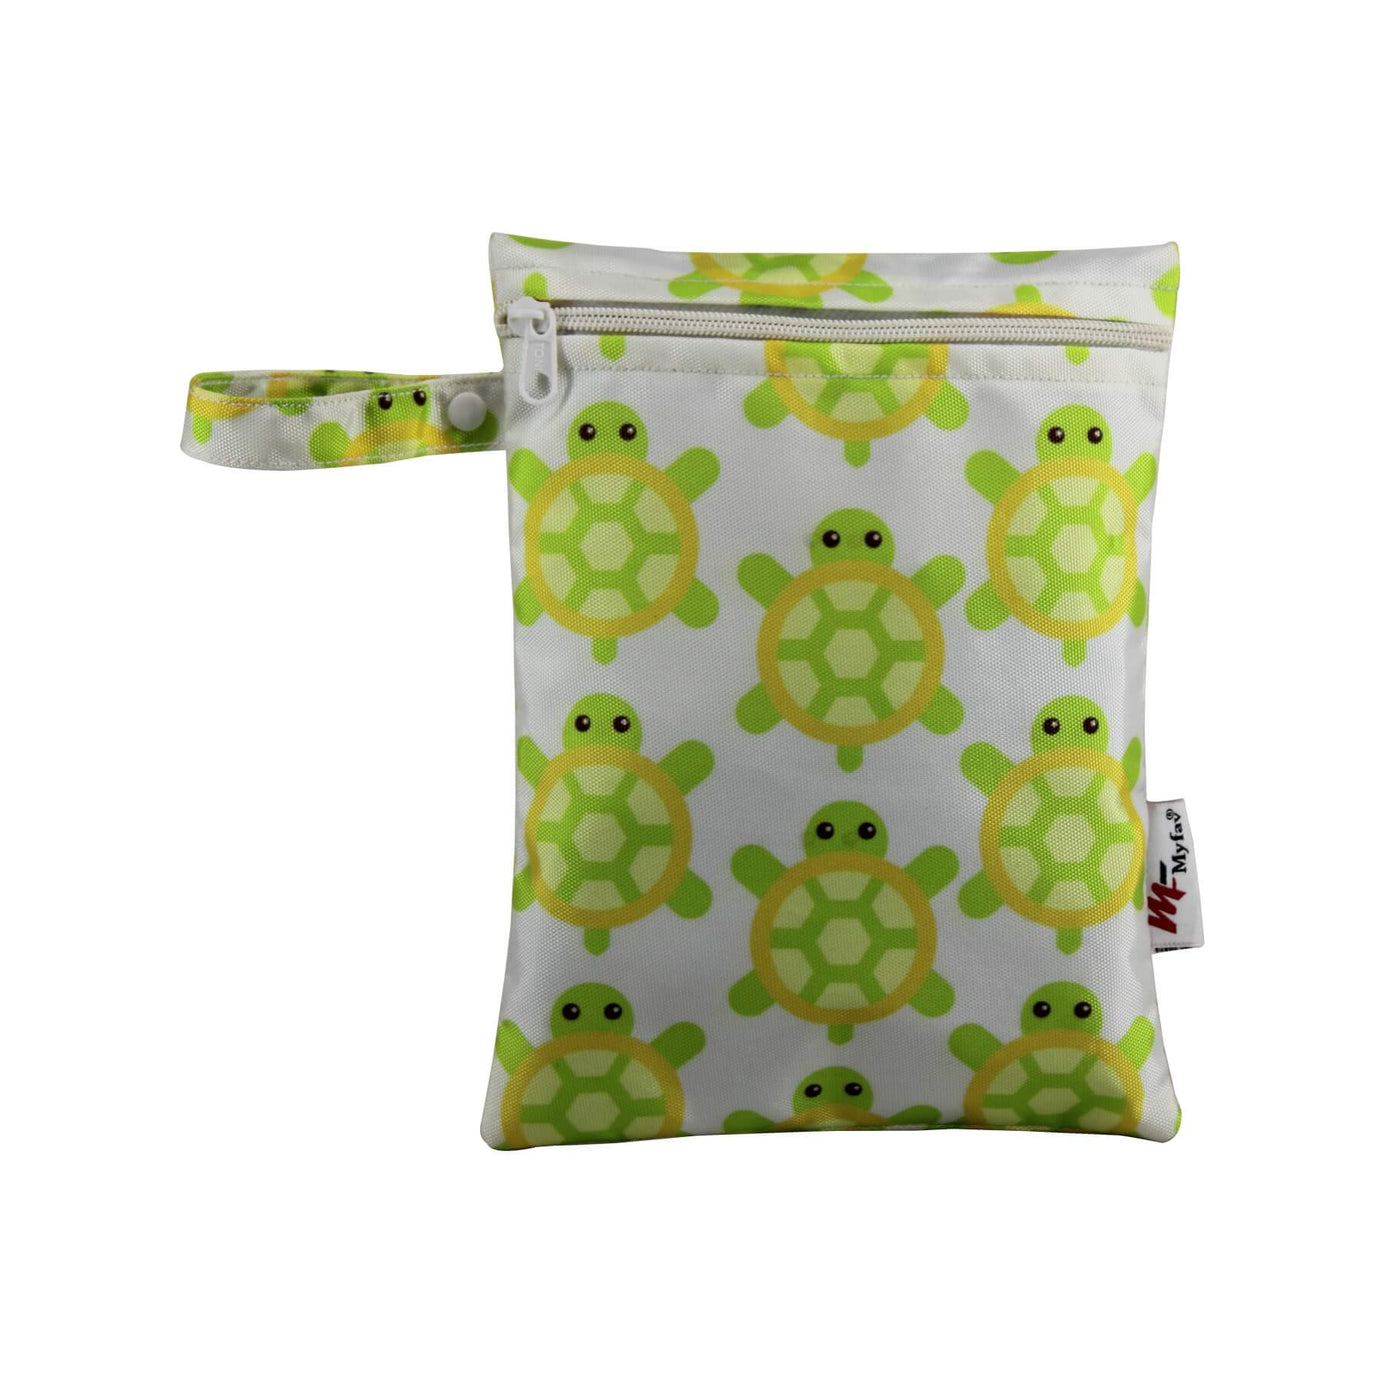 My Fav Turtle Print Multiutility Wet Dry Pouch/Diaper Bag/Travel Pouch/Travel Kit